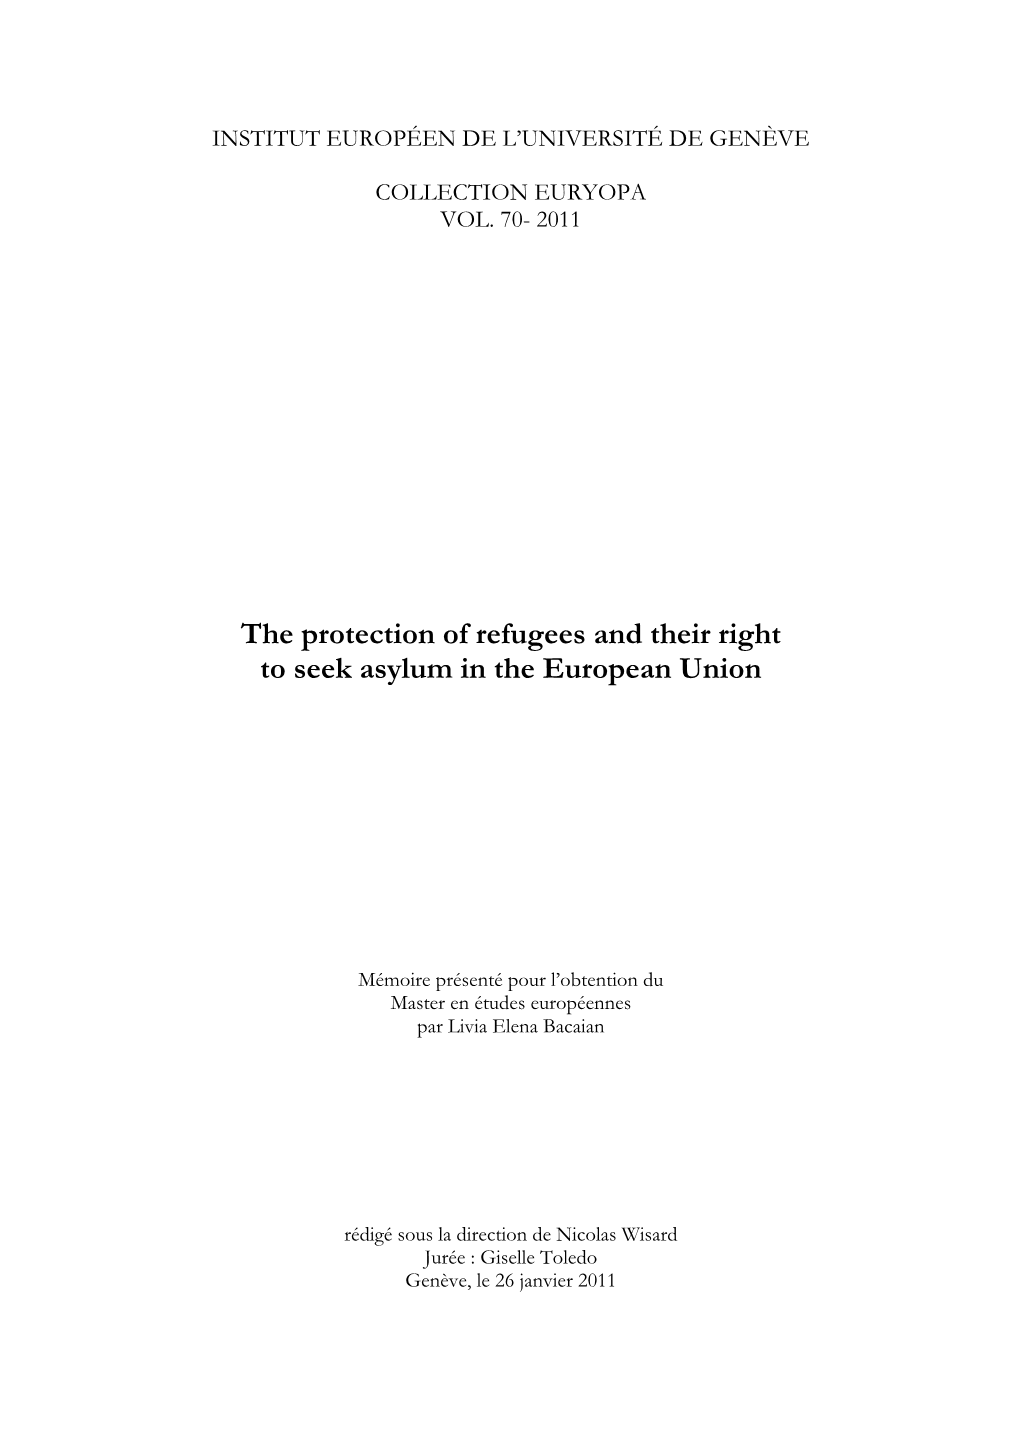 The Protection of Refugees and Their Right to Seek Asylum in the European Union